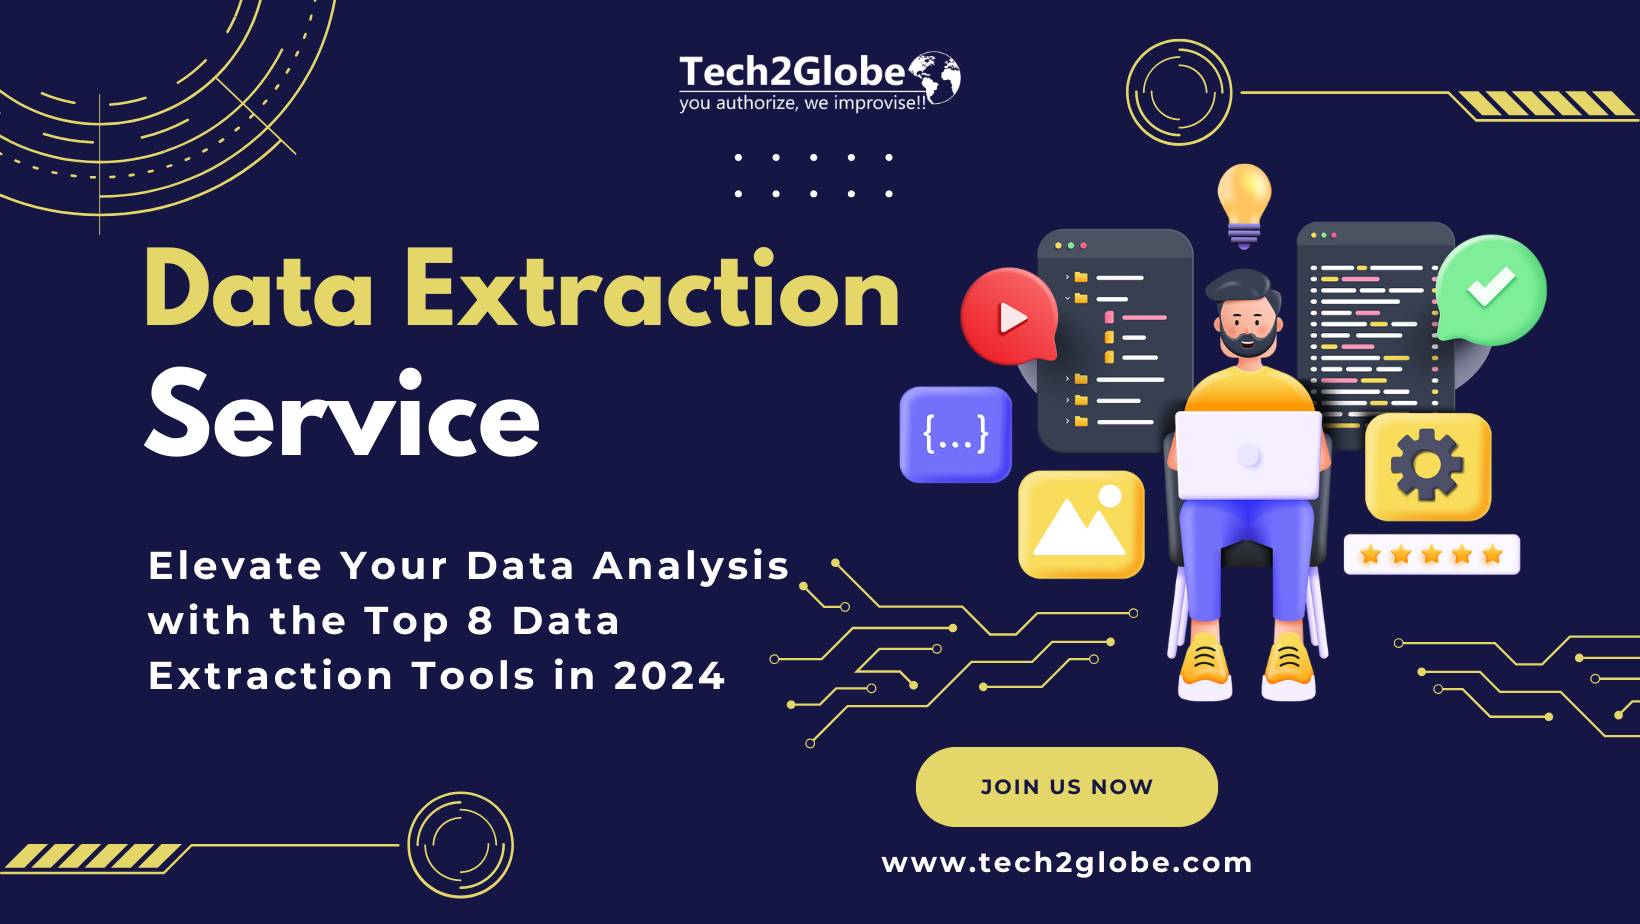 Elevate Your Data Analysis with the Top 8 Data Extraction Tools in 2024